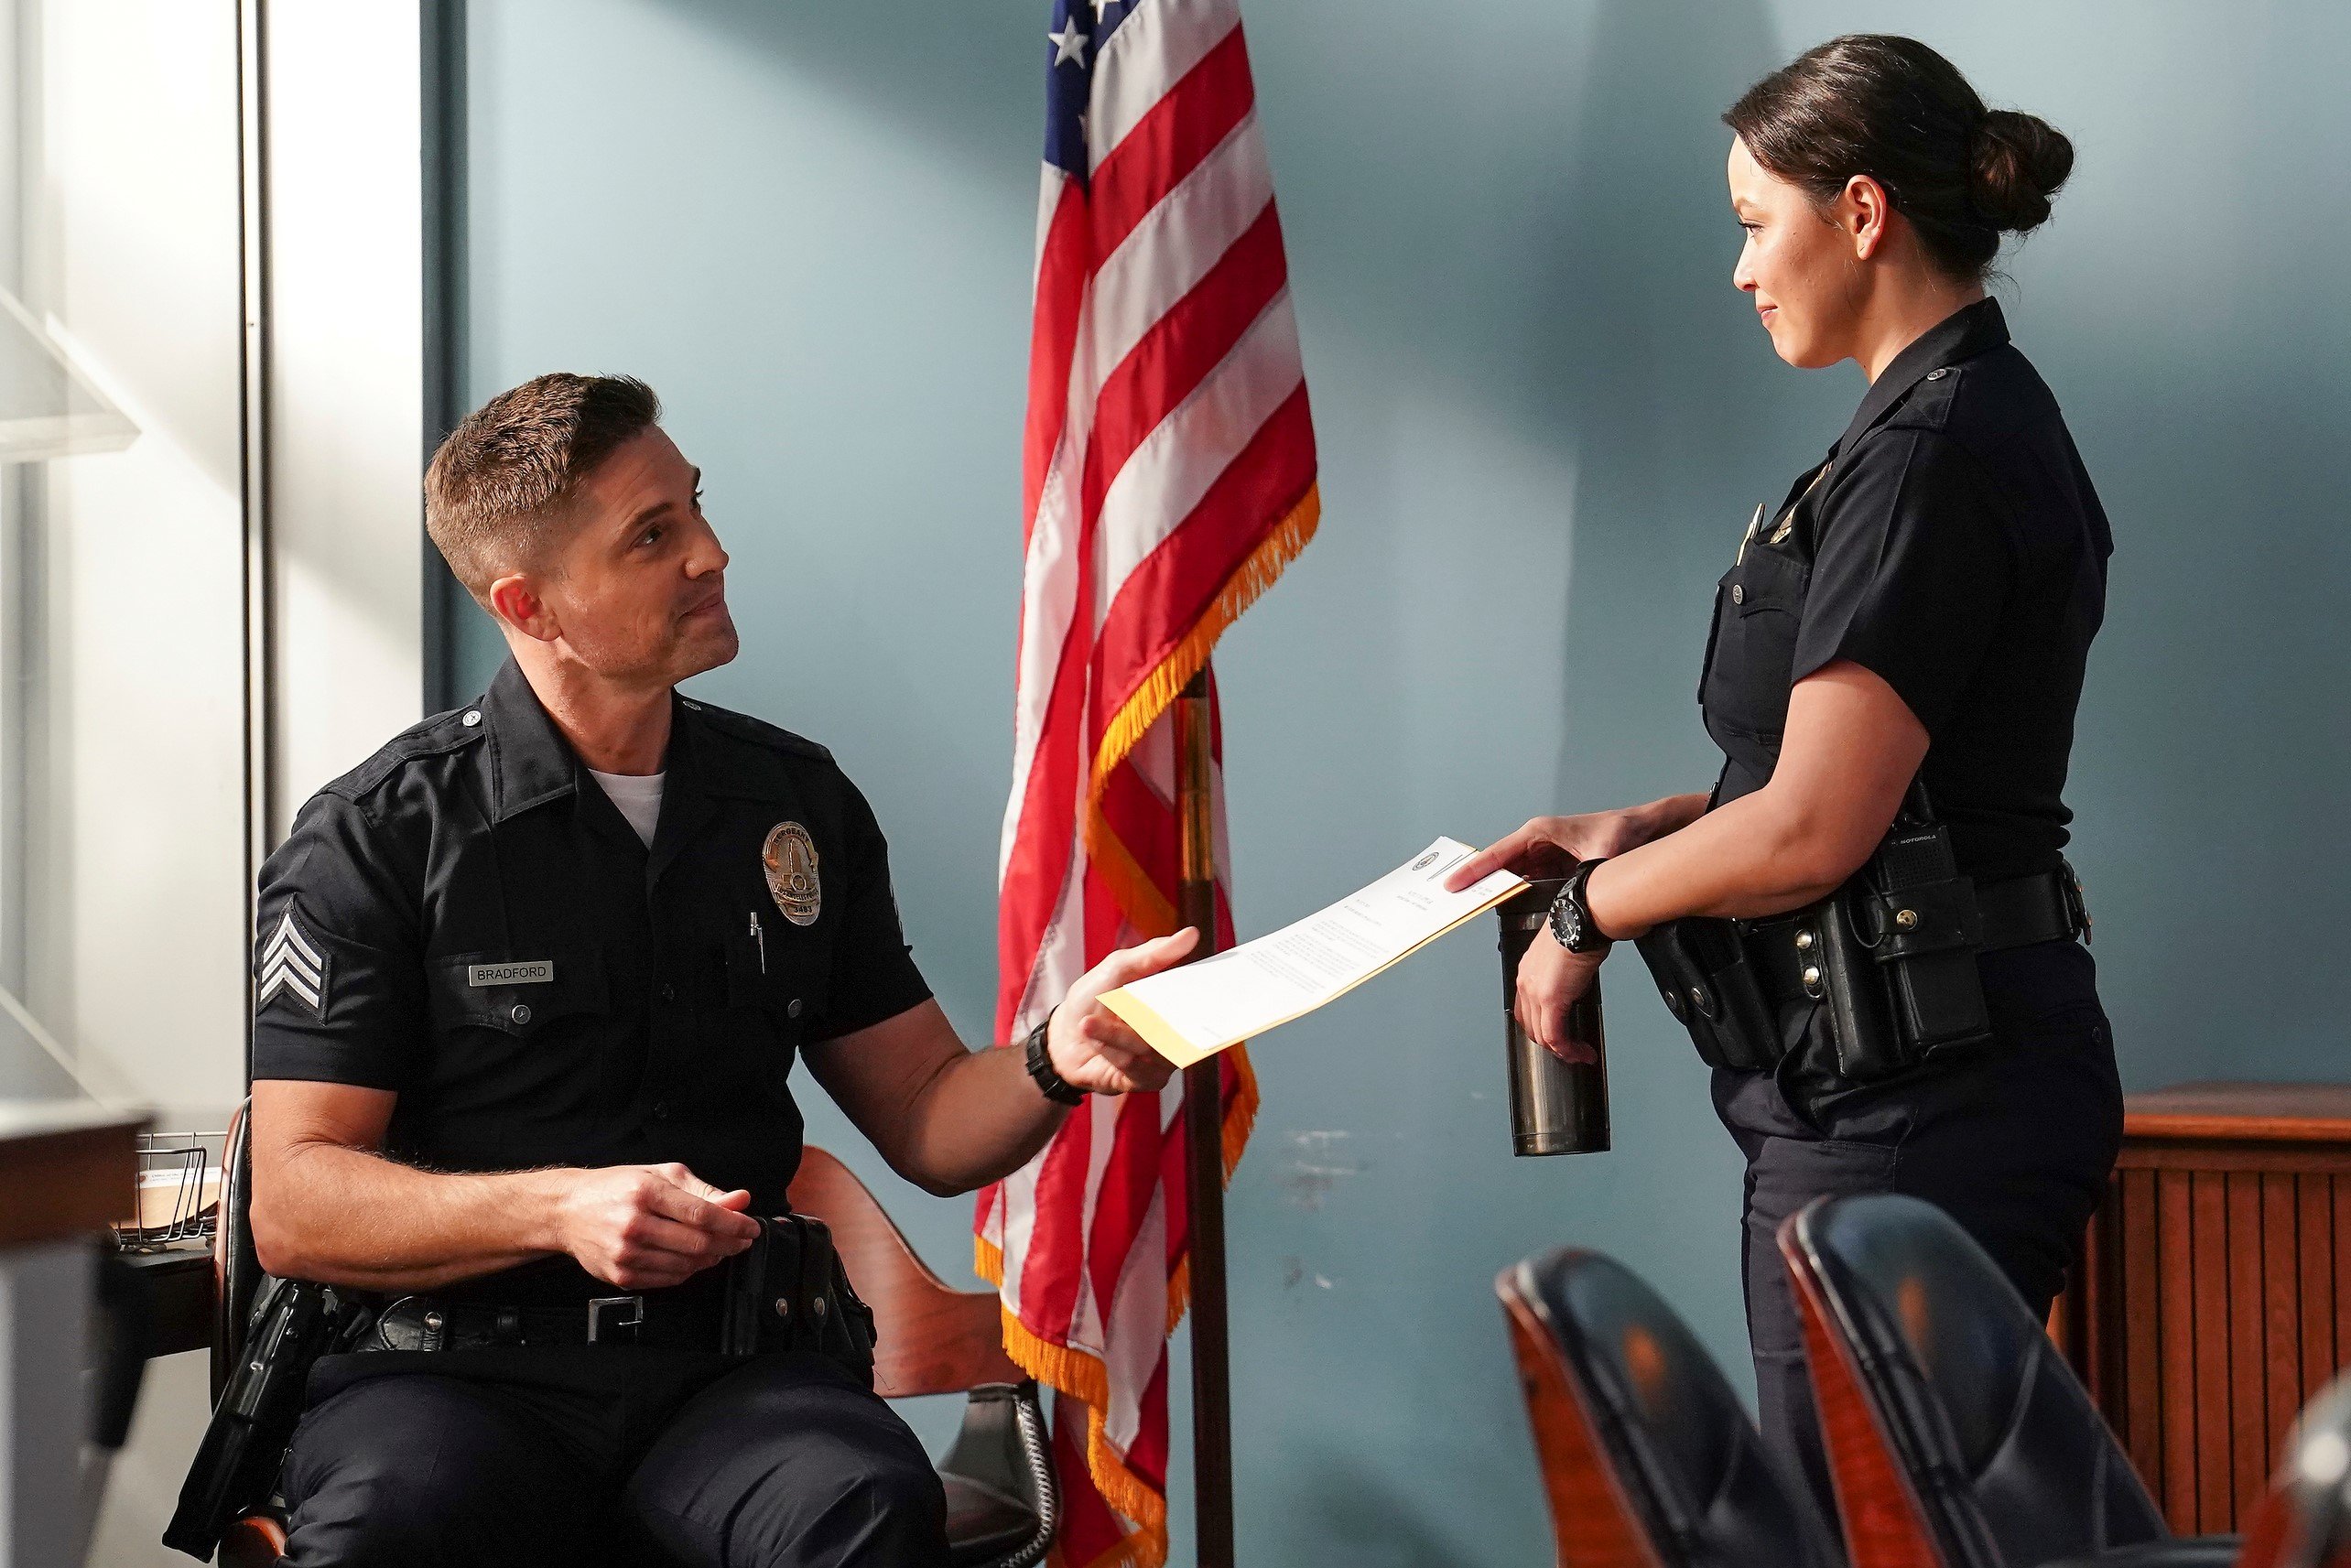 Eric Winter and Melissa O'Neil, in character as Tim Bradford and Lucy Chen, share a scene wearing their cop uniforms in 'The Rookie' Season 5 Episode 13 on ABC.